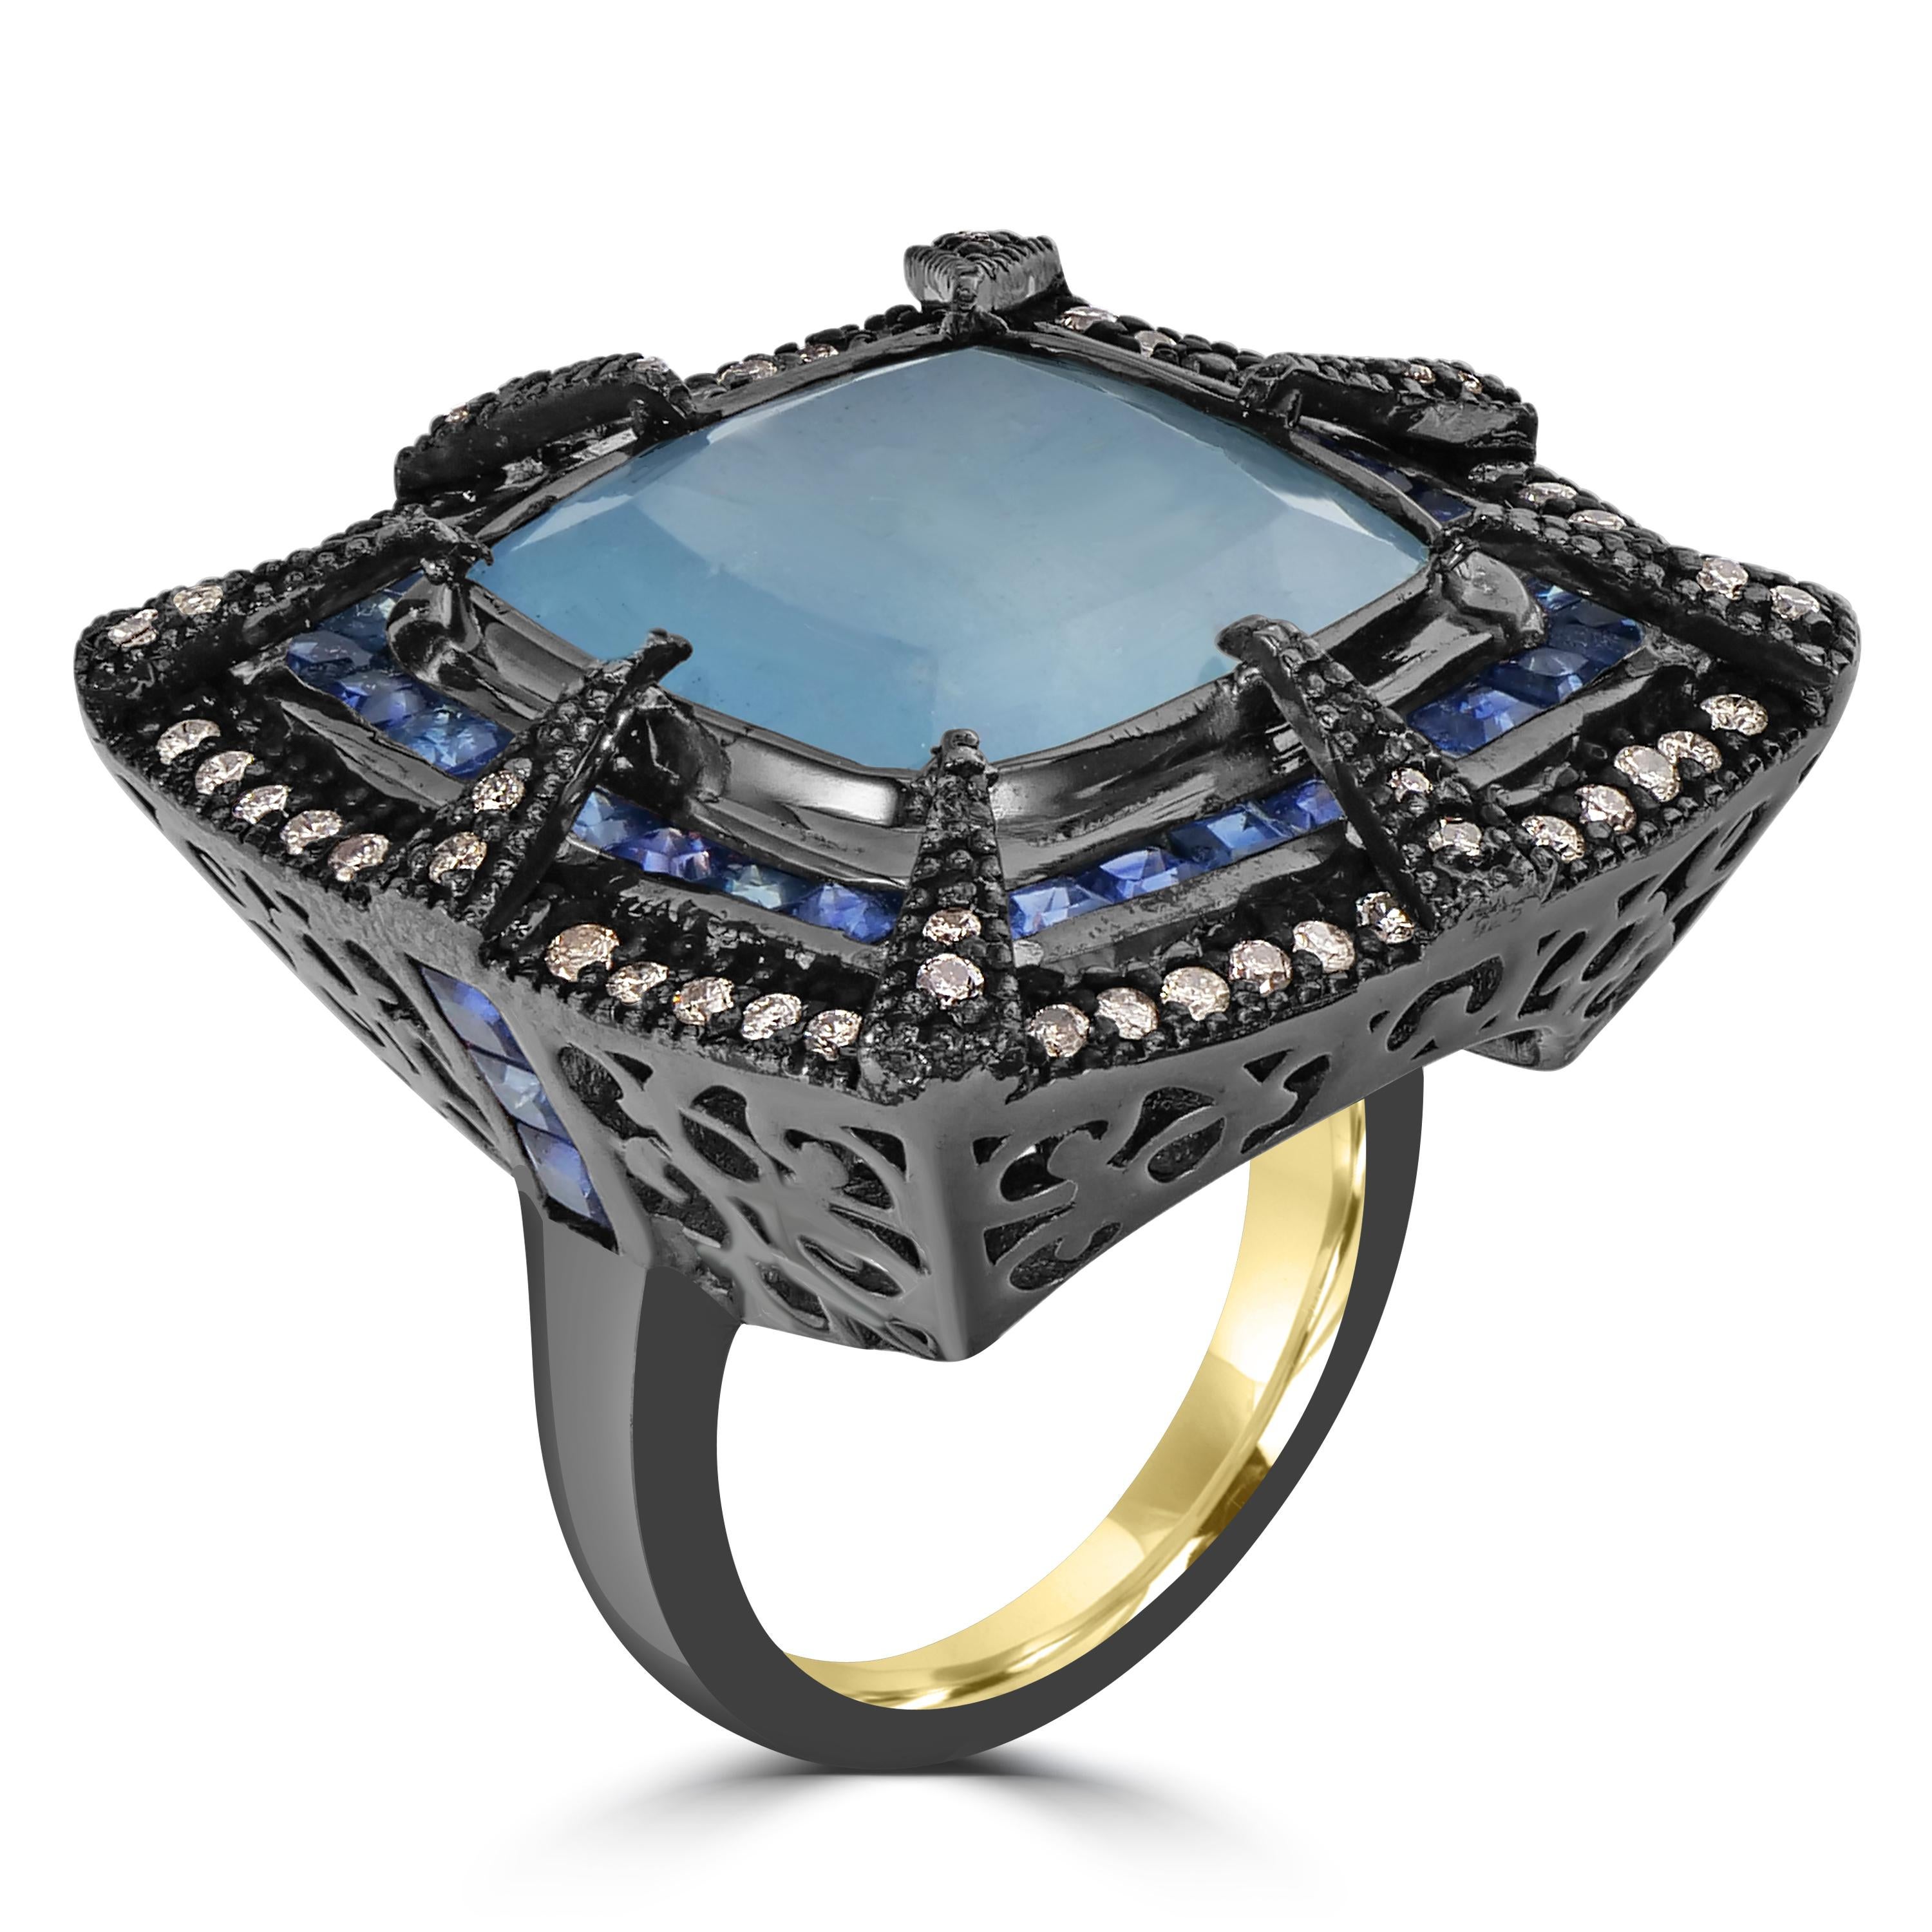 Indulge in the regal charm of the Victorian 17.5 Cttw. Aquamarine, Sapphire, and Diamond Cocktail Ring — a masterpiece that fuses classic design with modern allure. At its heart sits a cushion-cut aquamarine, a majestic 13.5 carats, securely